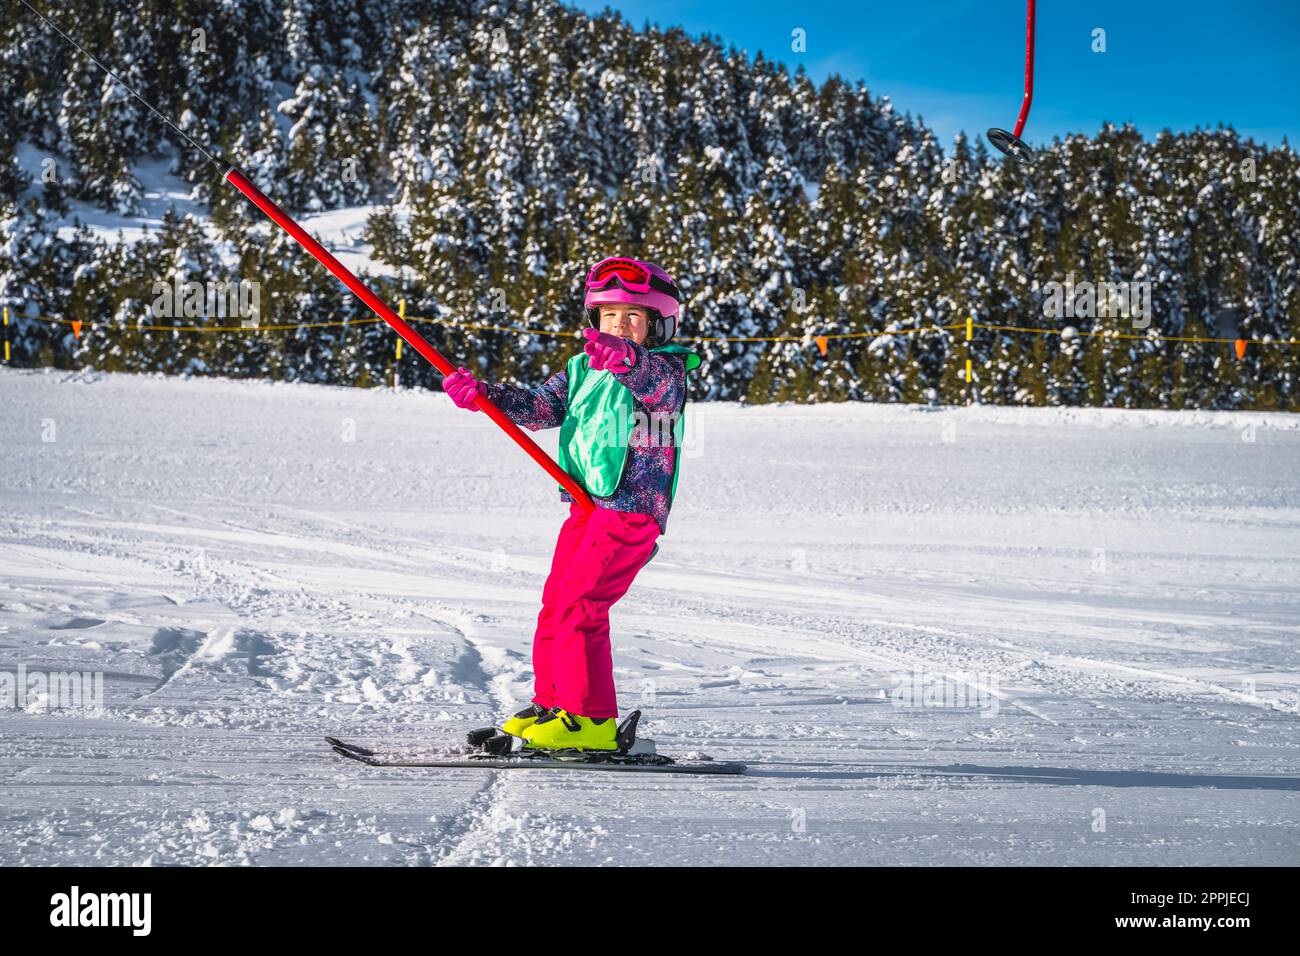 Young skier, a child, having fun when riding up on a ski drag lift, Andorra Stock Photo